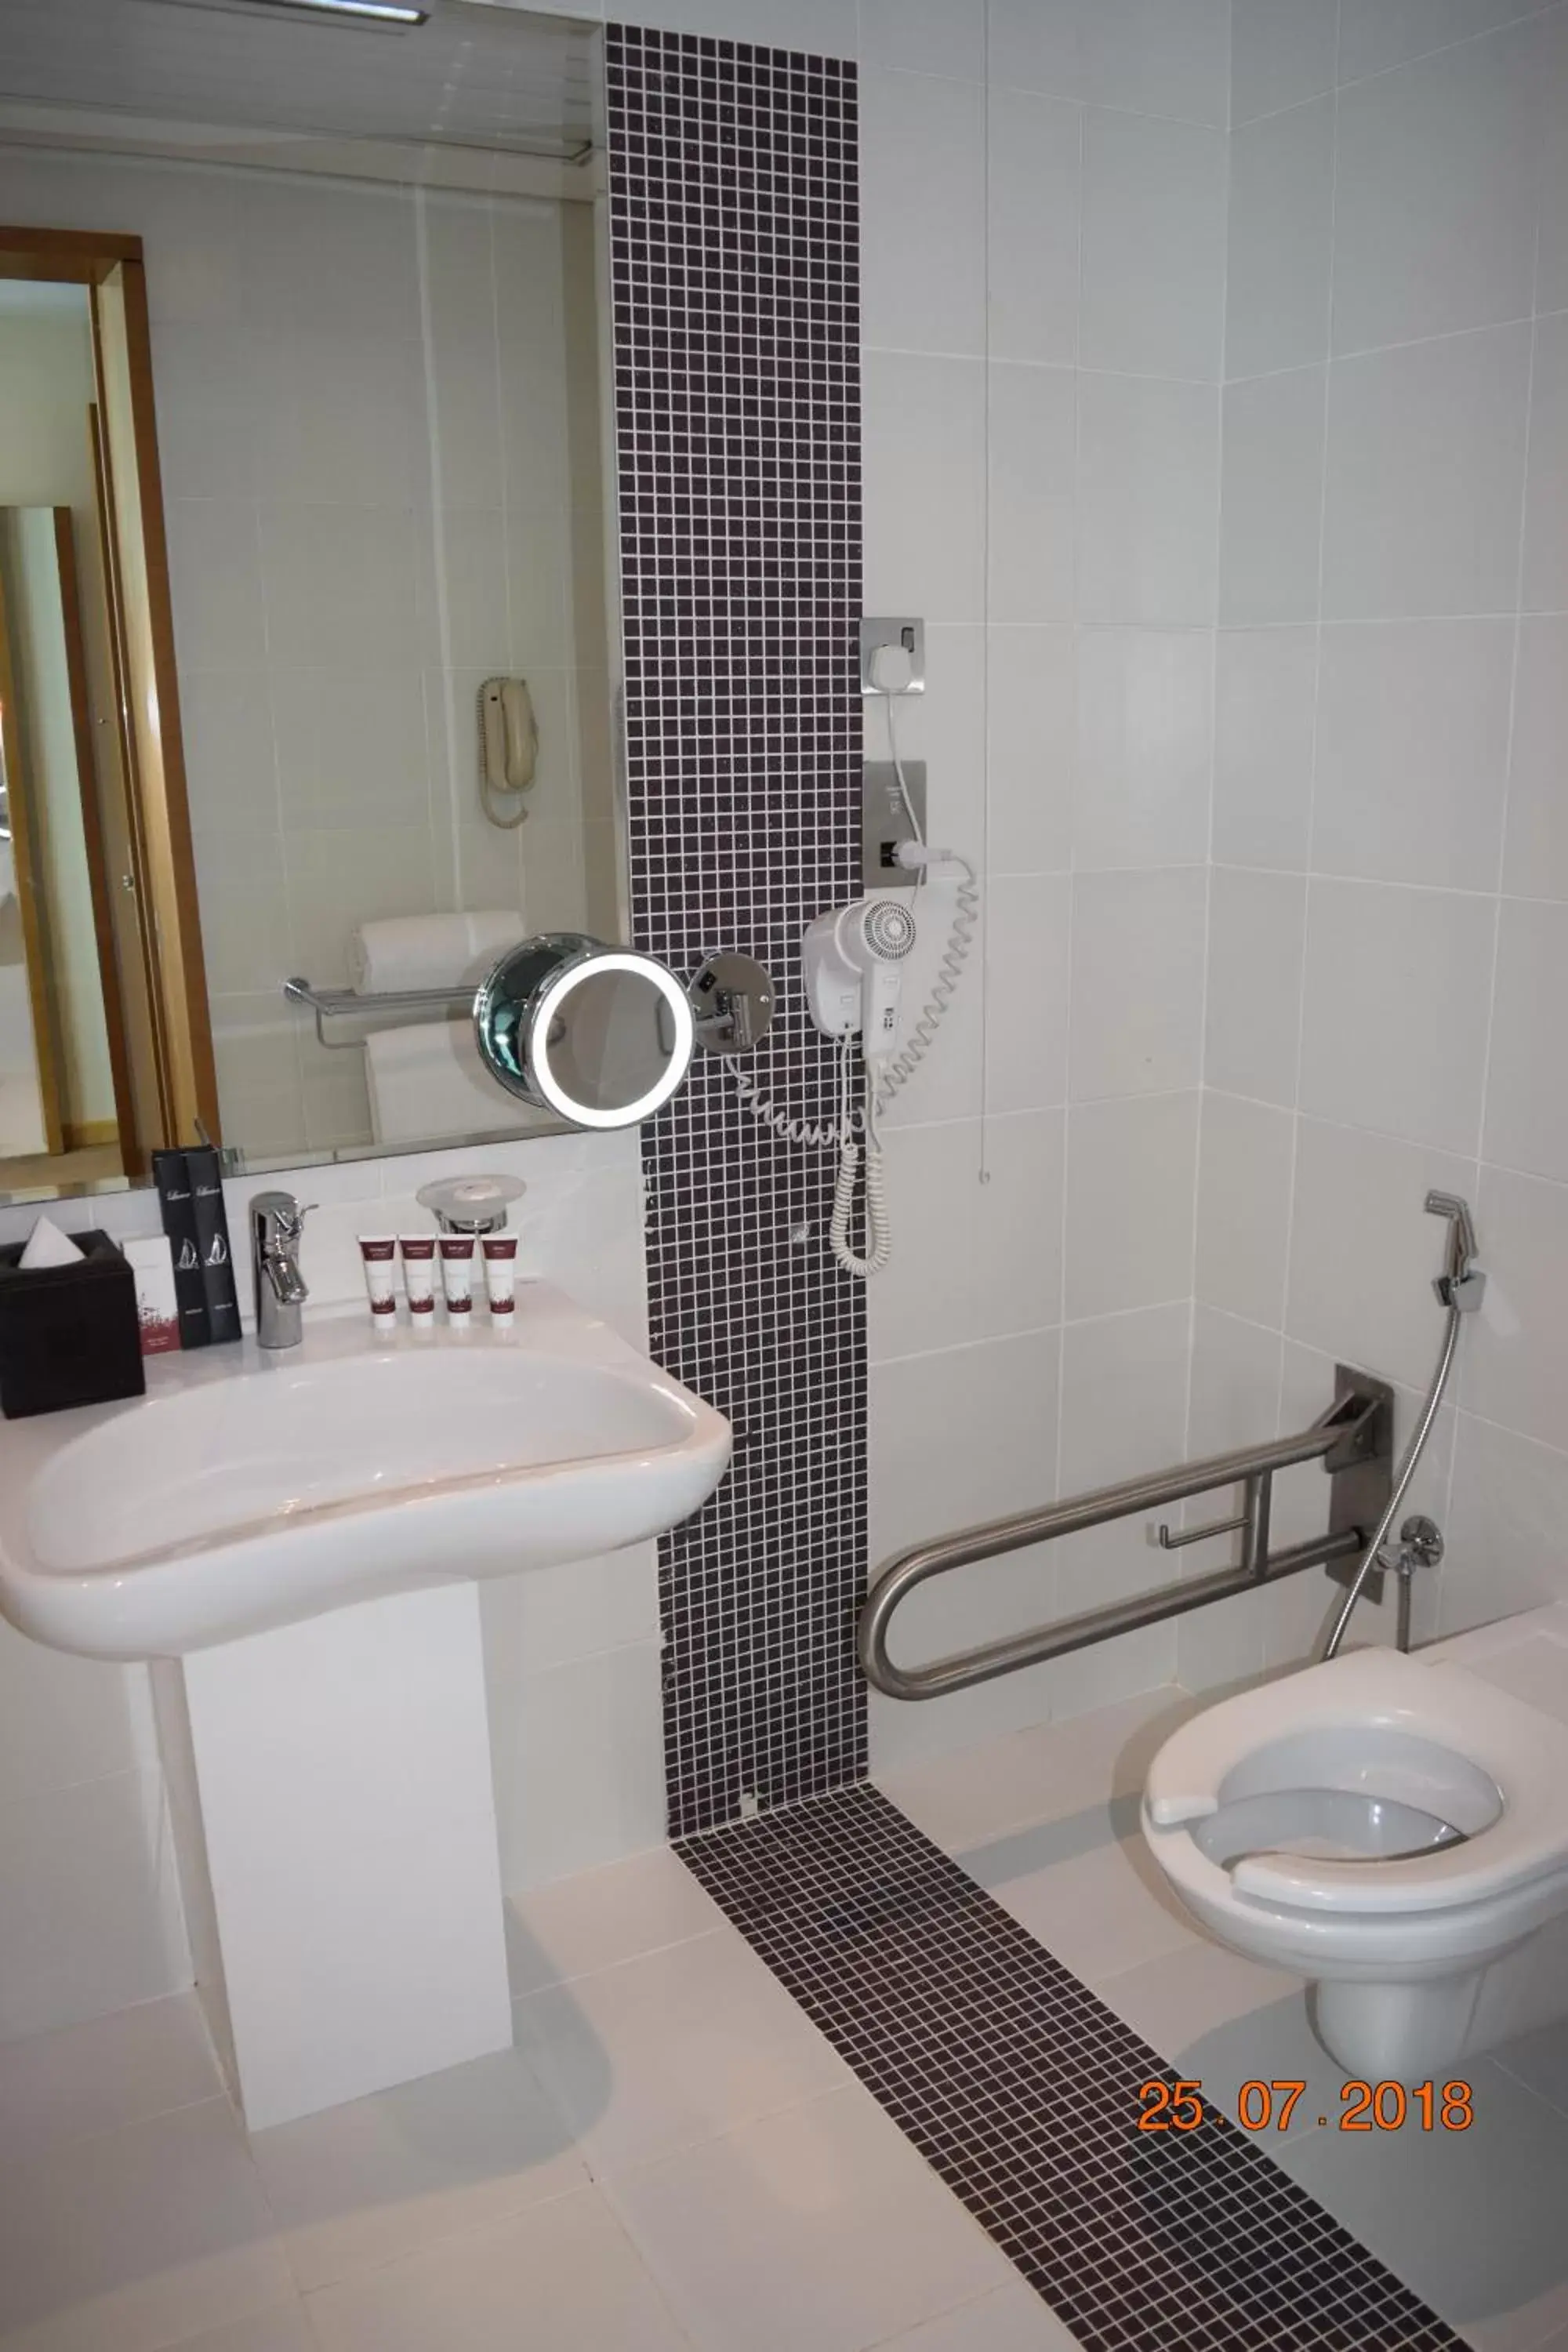 Facility for disabled guests, Bathroom in TRYP by Wyndham Abu Dhabi City Center